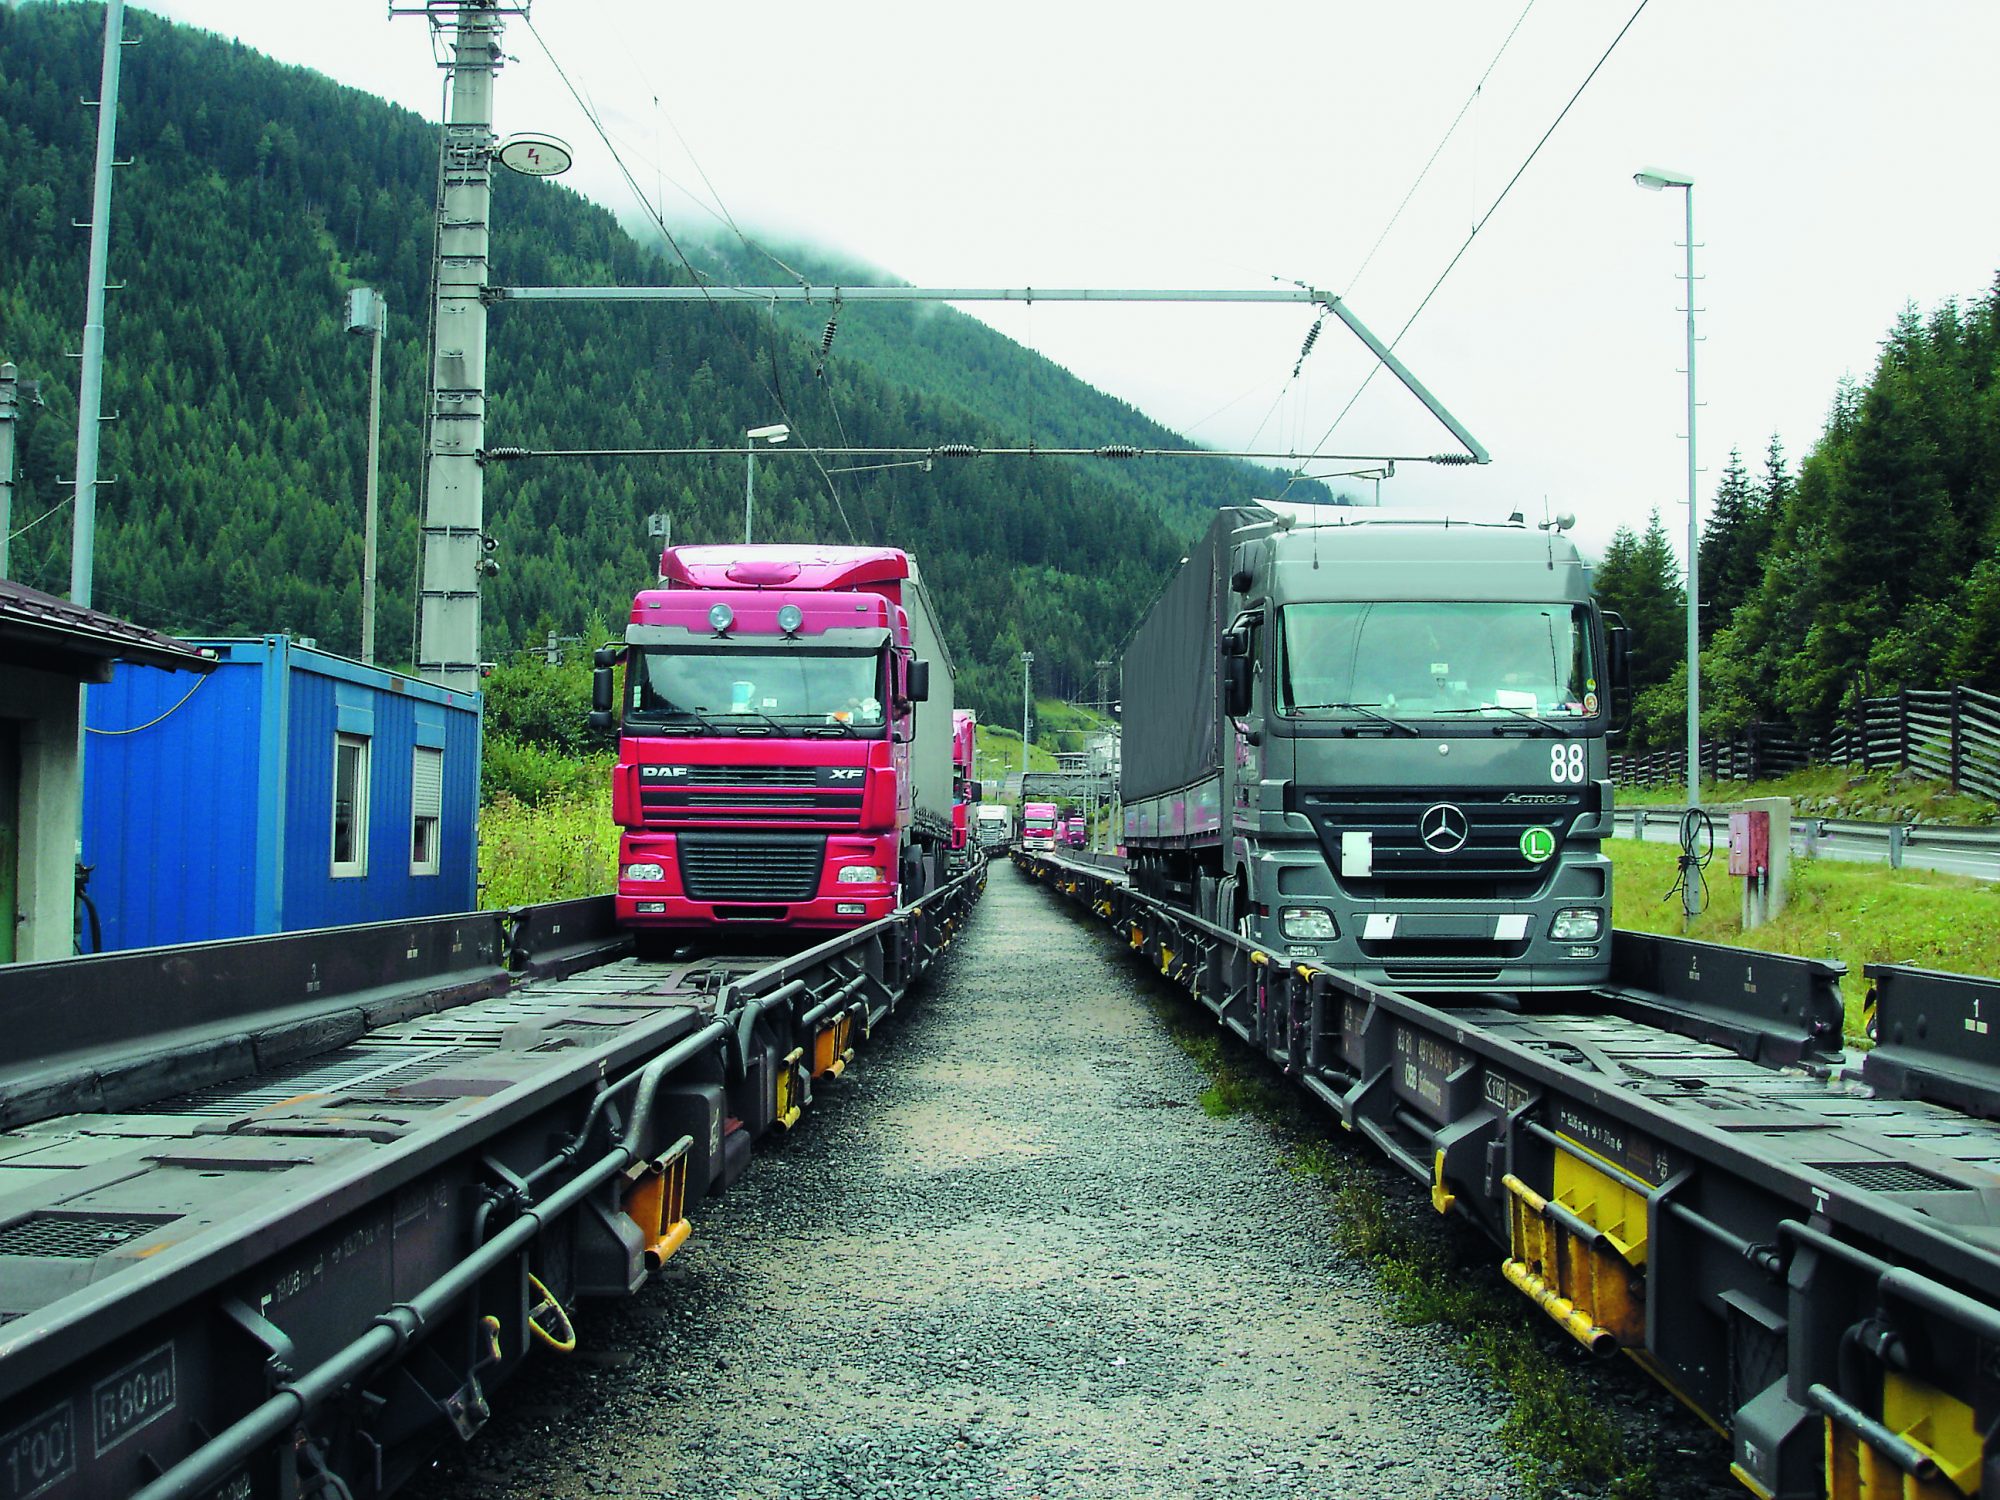 Tyrol is working on strengthening its Rolling Highway